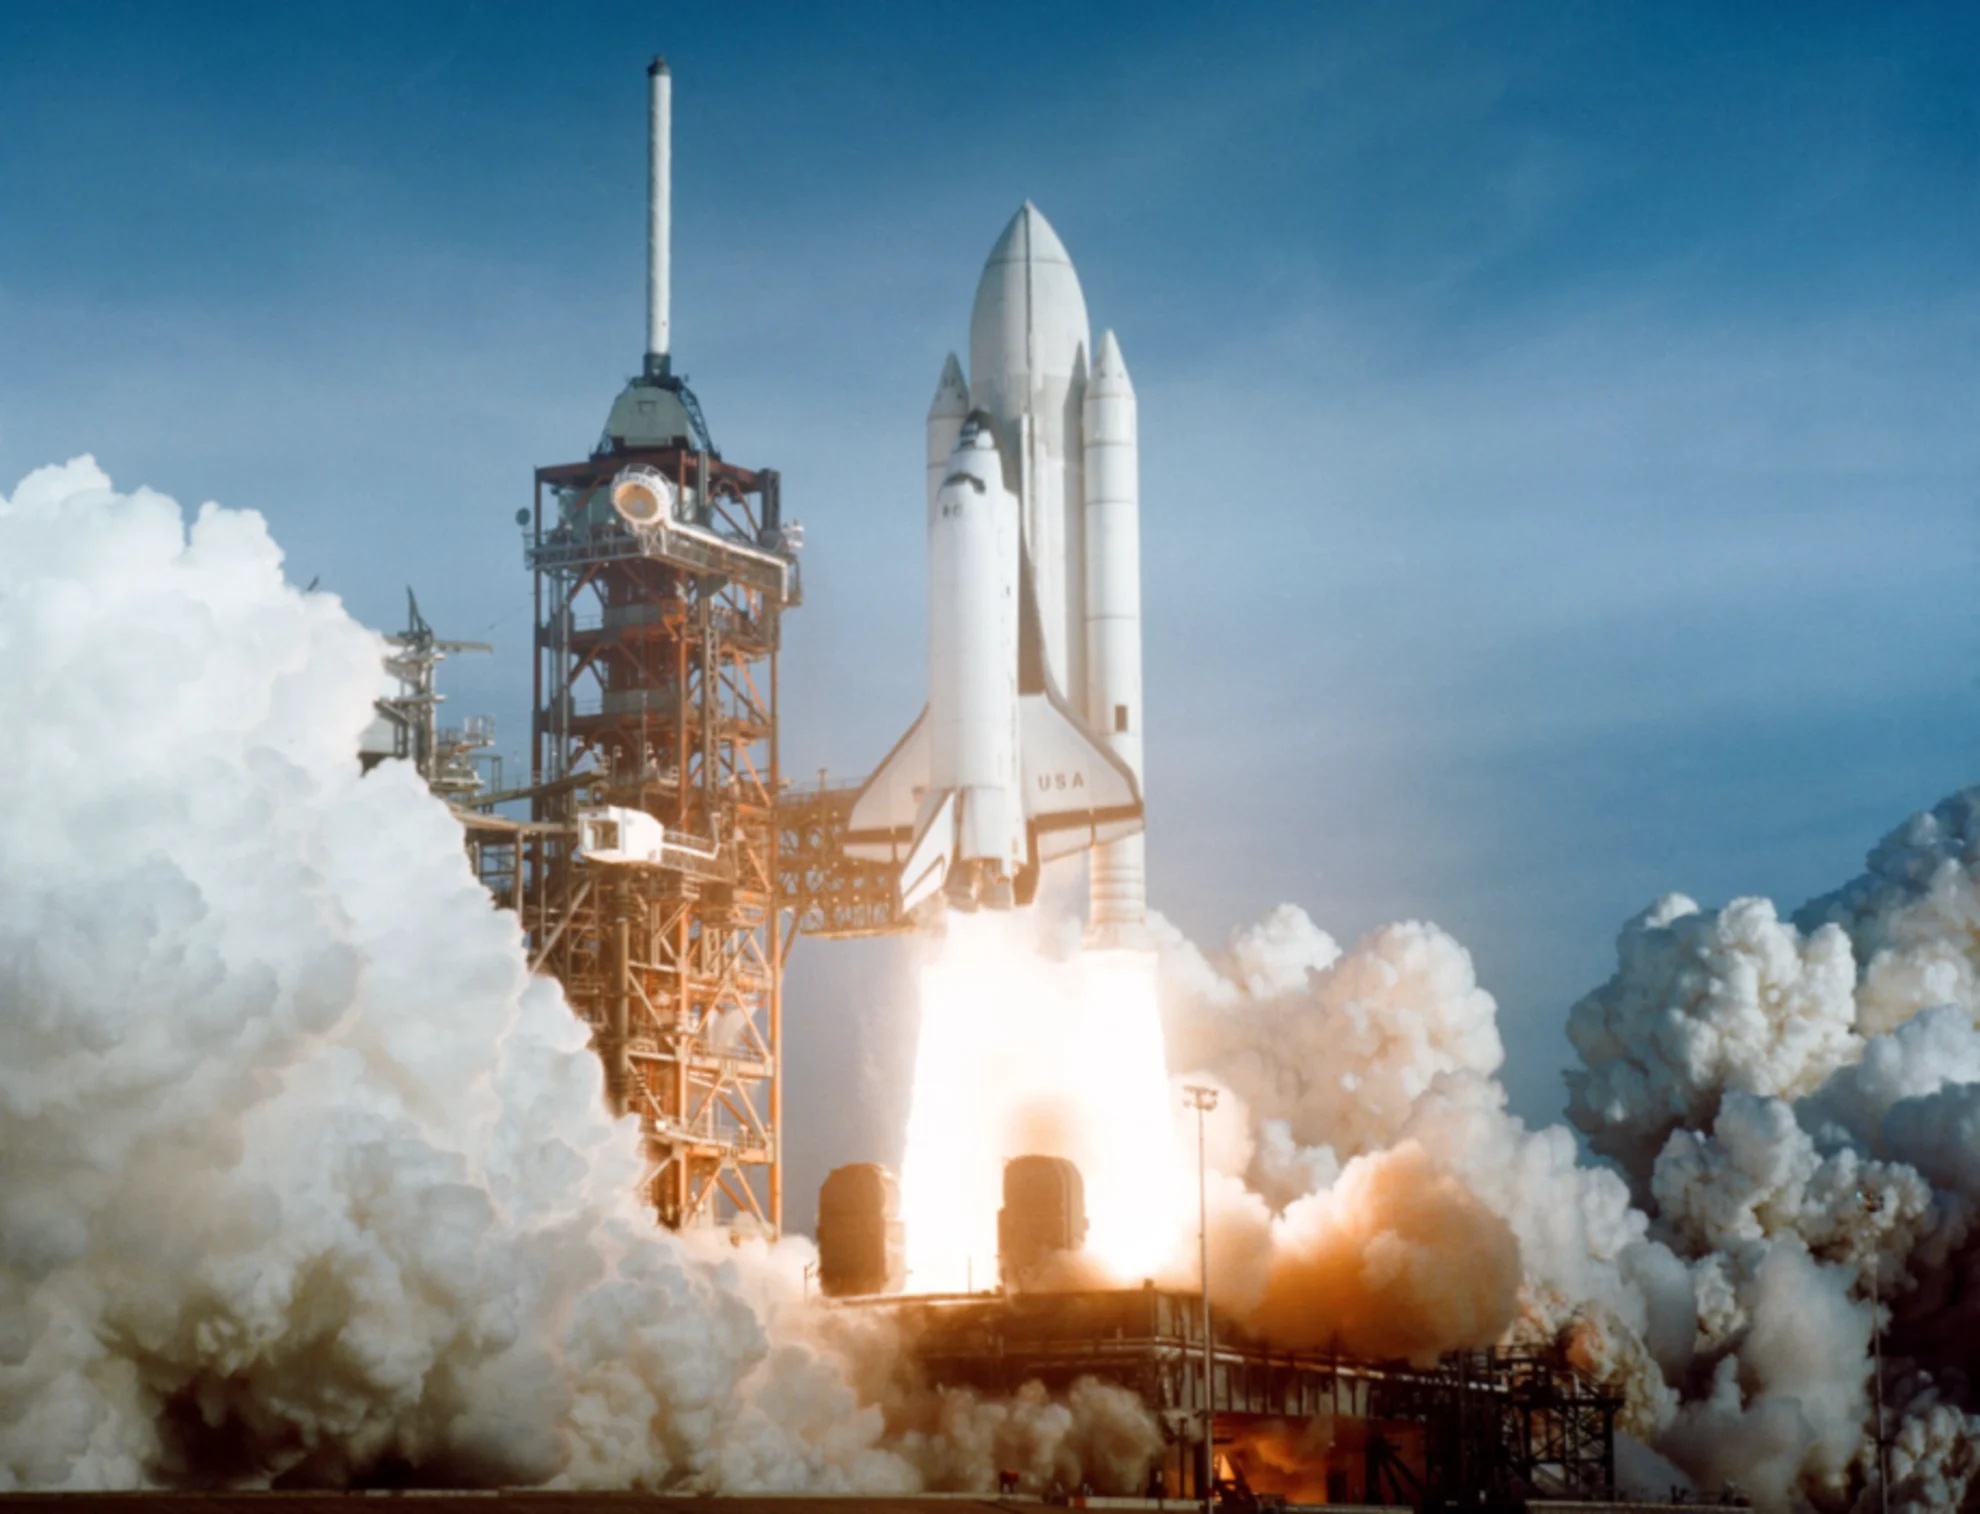 Remembering Columbia's inaugural flight — NASA's first space shuttle launch